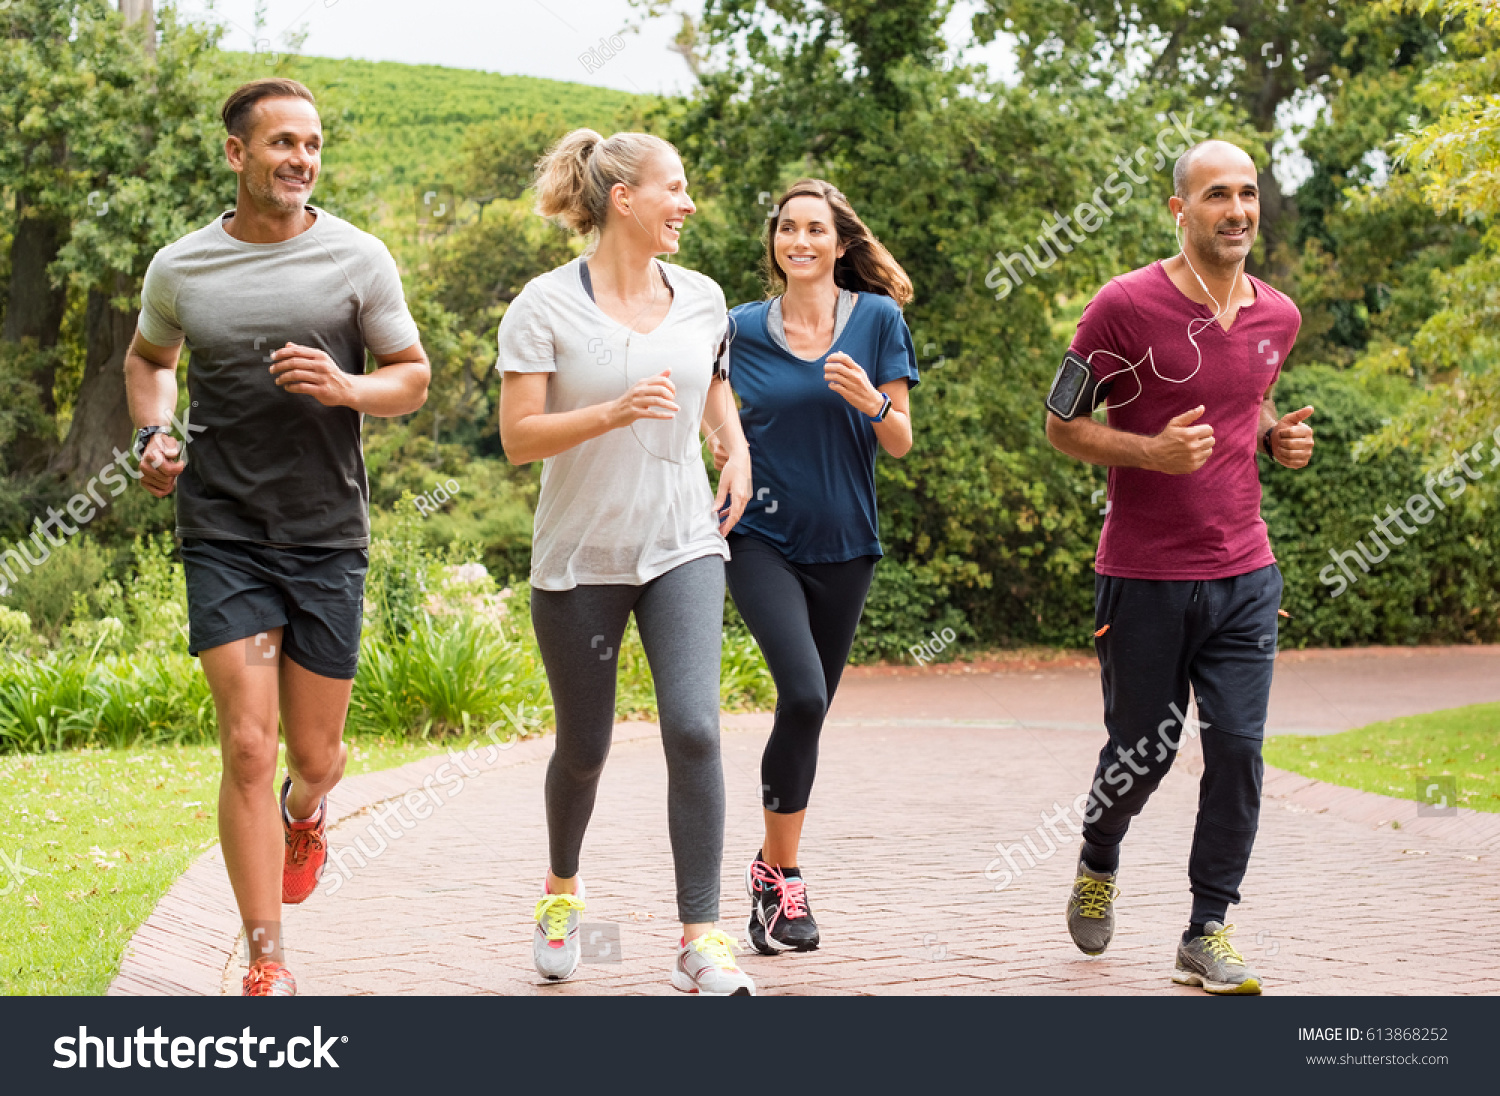 Healthy group of people jogging on track in park. Happy couple enjoying friend time at jogging park while running. Mature friends running together outdoor. #613868252